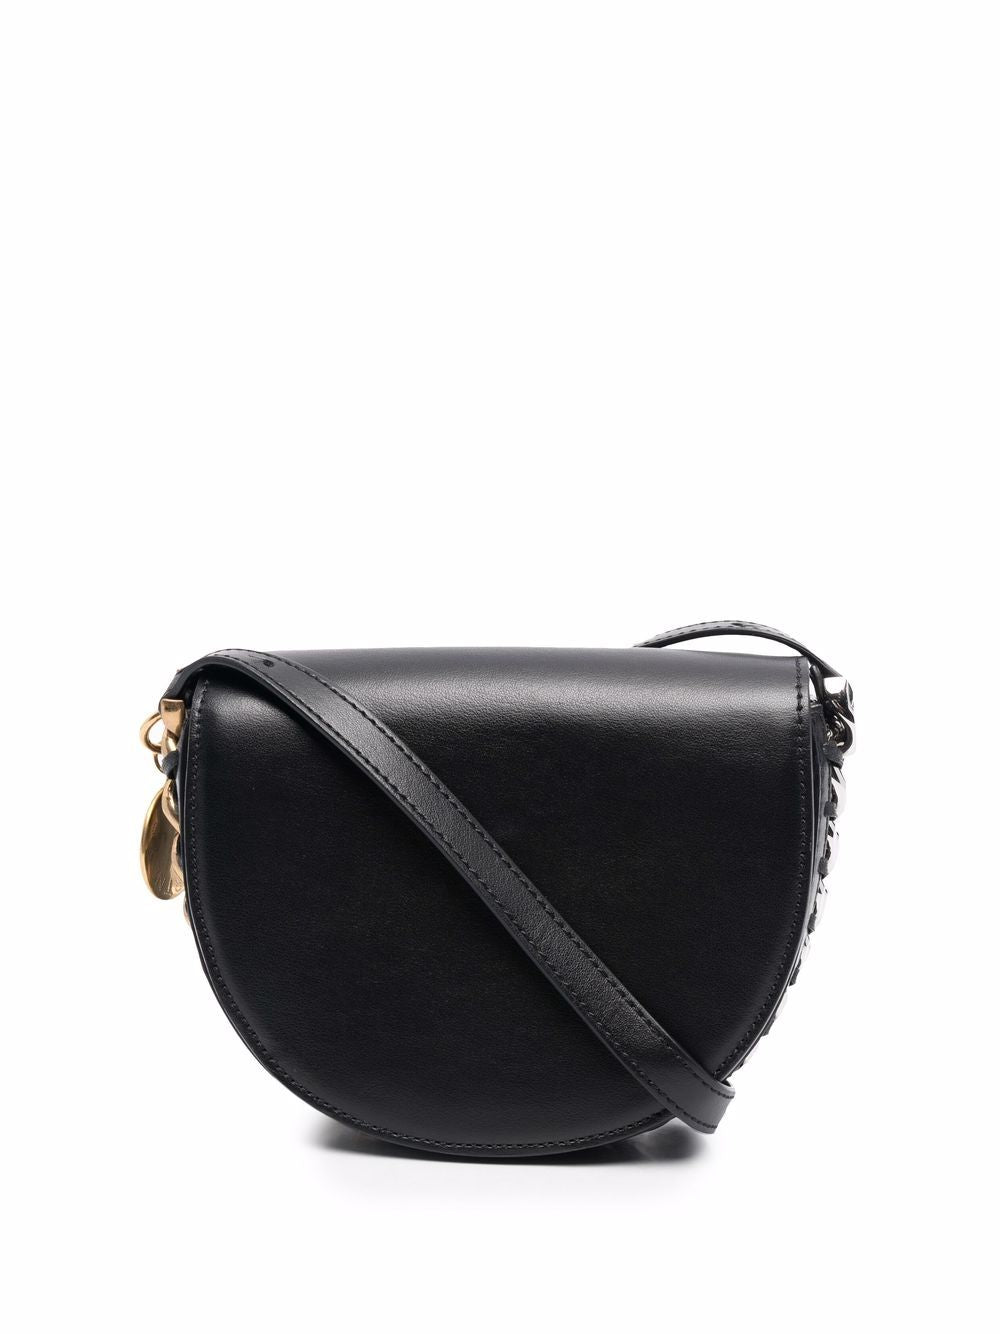 Black faux leather small Frayme crossbody bag